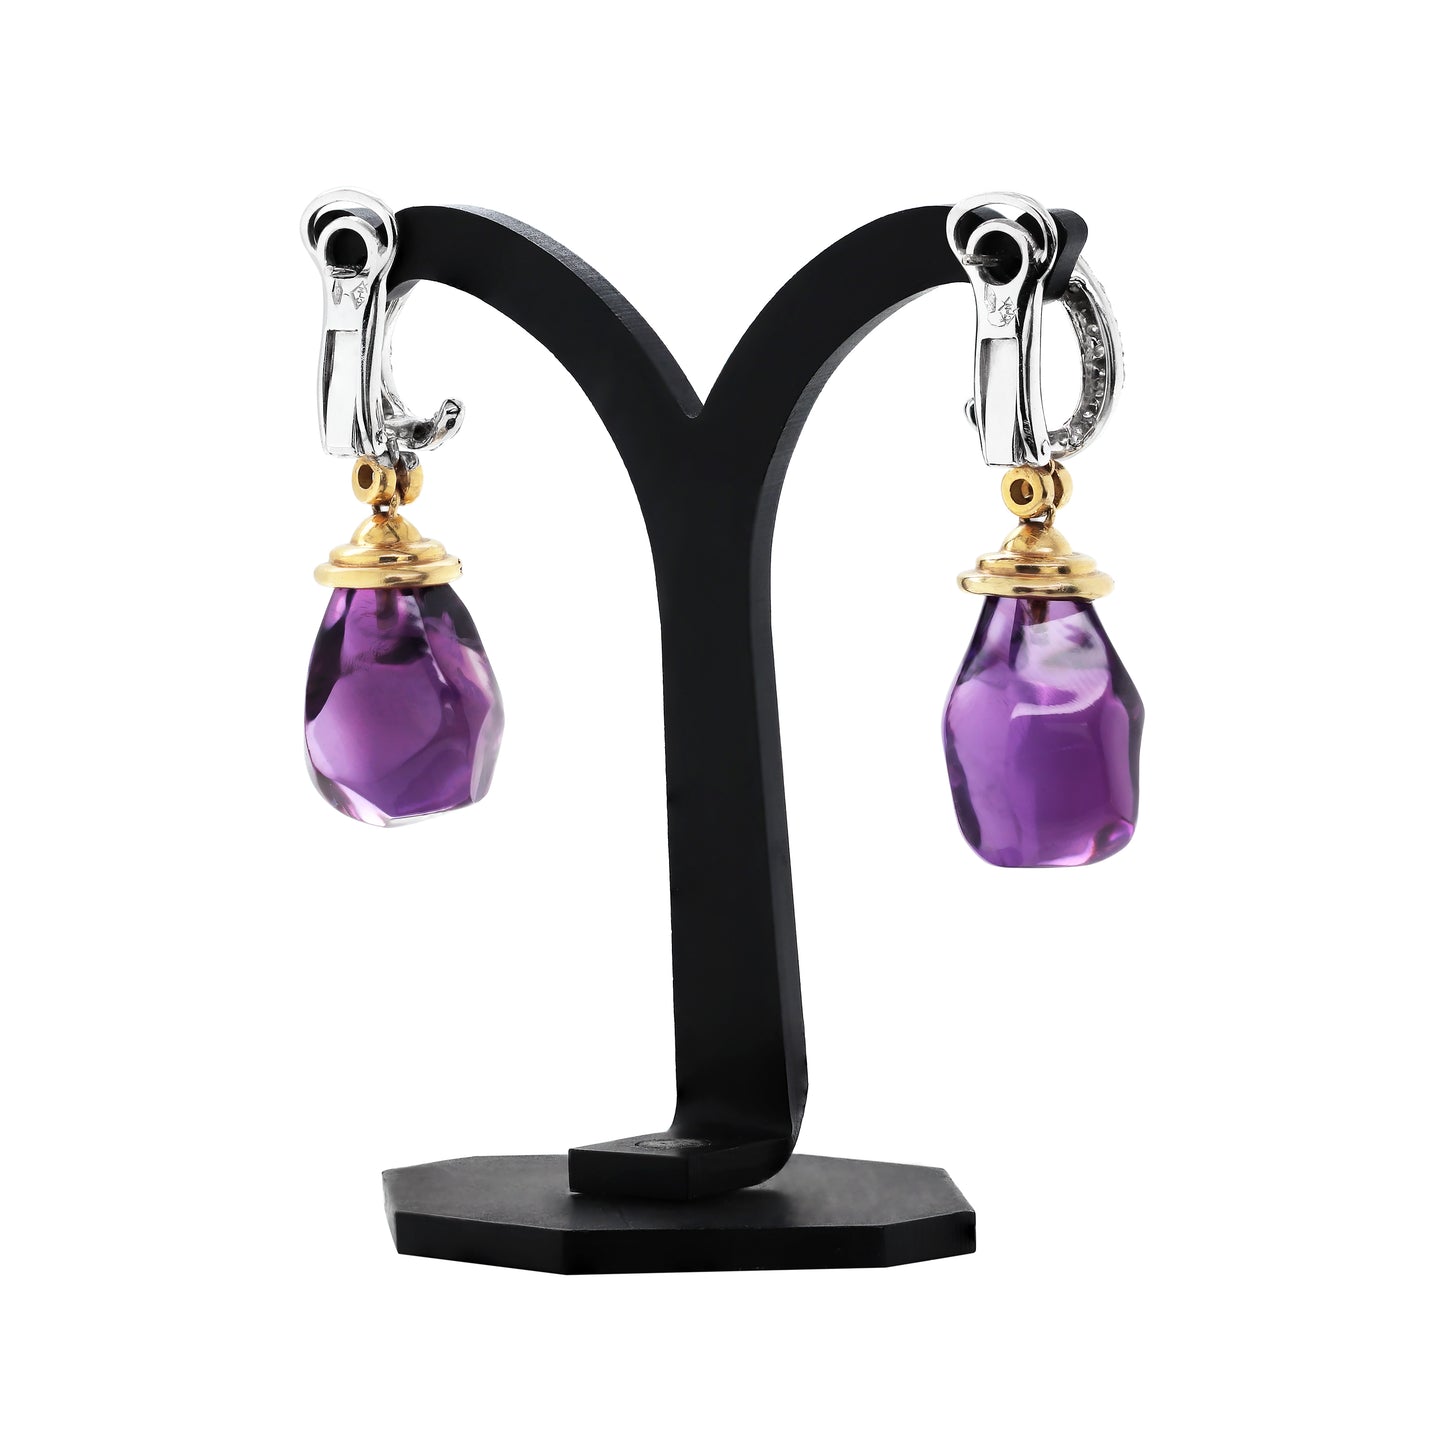 Amethyst and Diamond 18 Carat White and Yellow Gold Drop Earrings